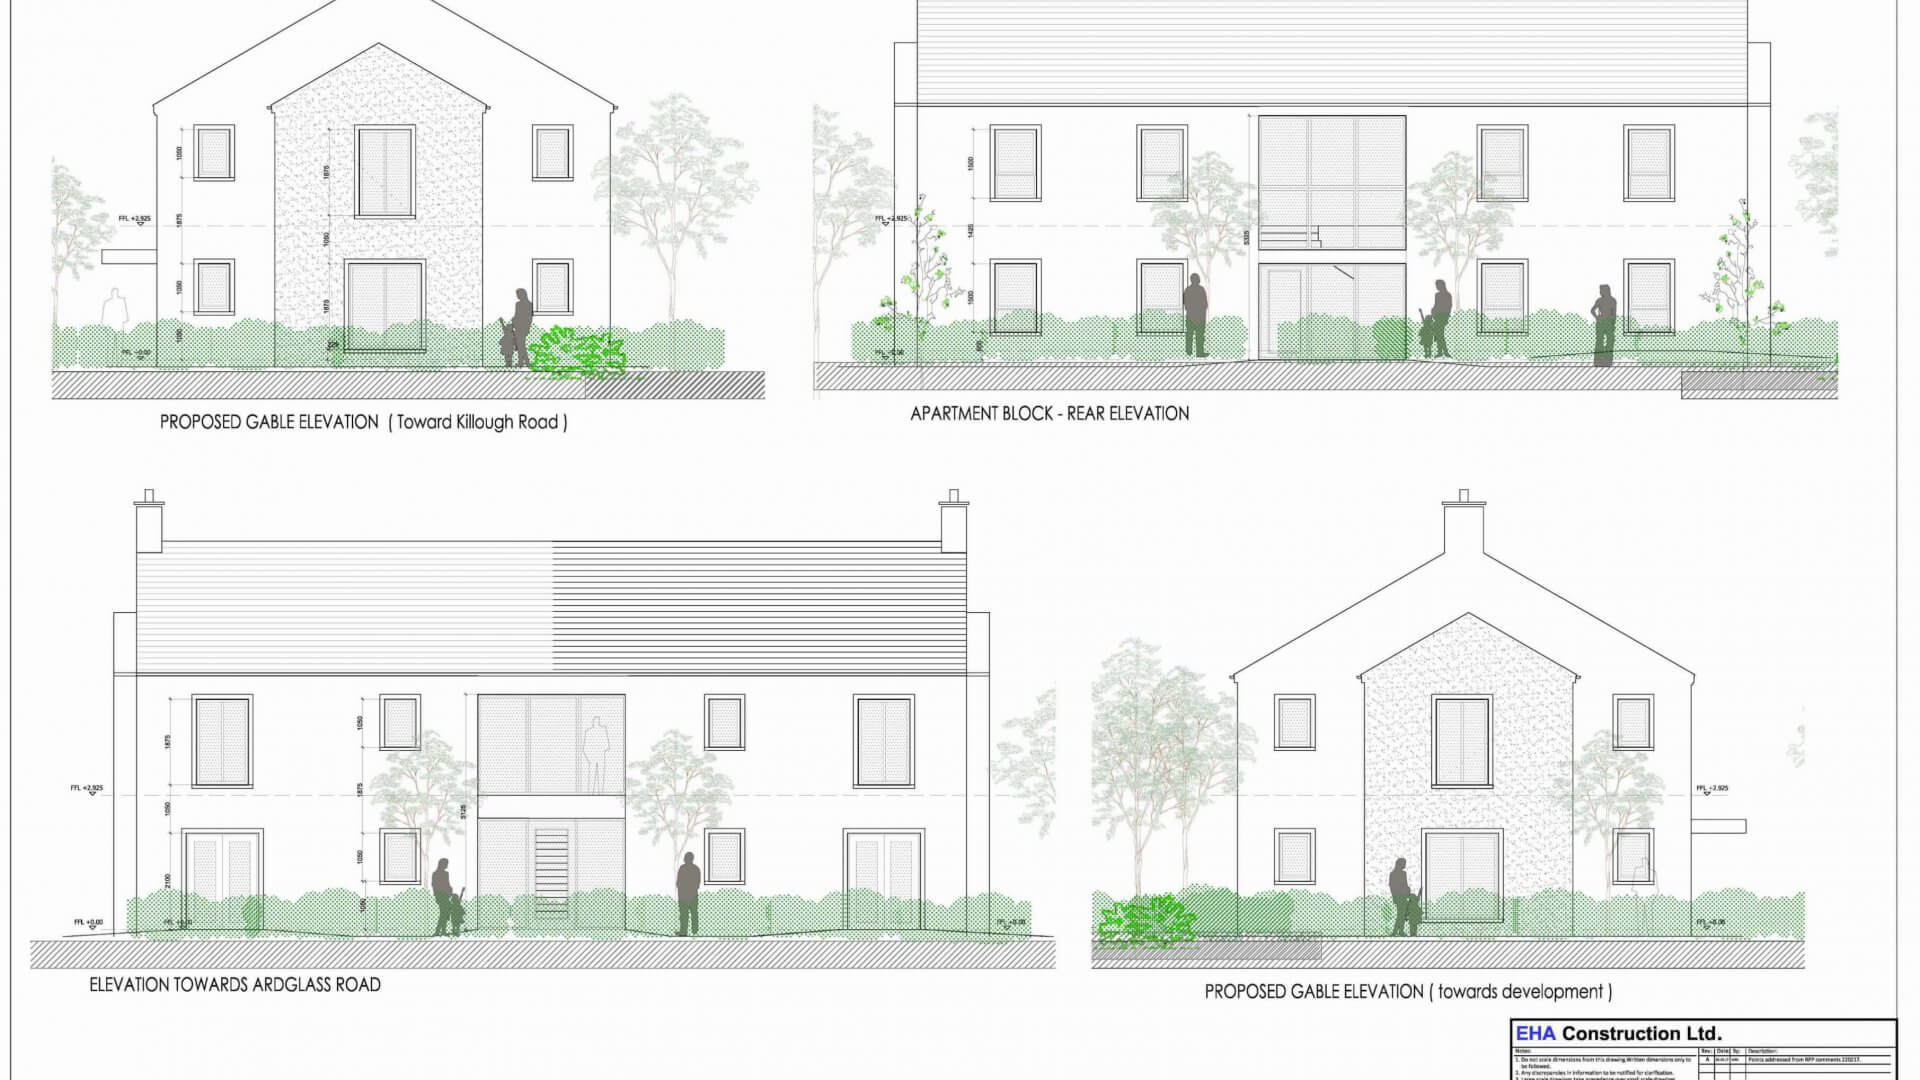 0004 Type A Apt elevations Rev A compress e1520420252340 1920x1080 - New Contract: Old Downe Hospital